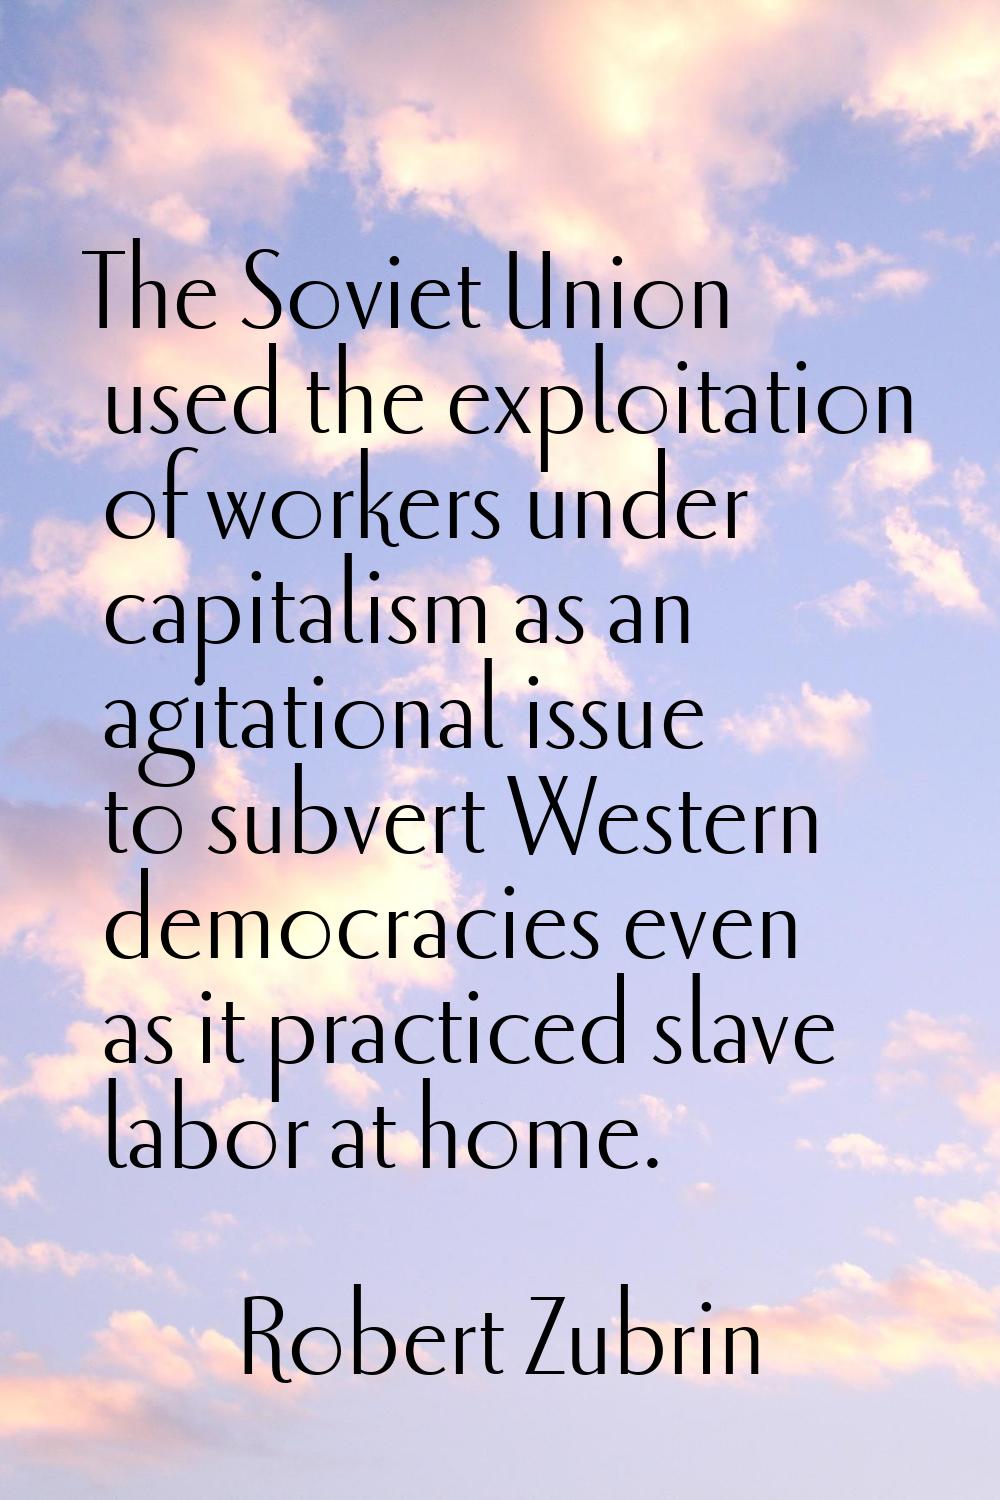 The Soviet Union used the exploitation of workers under capitalism as an agitational issue to subve